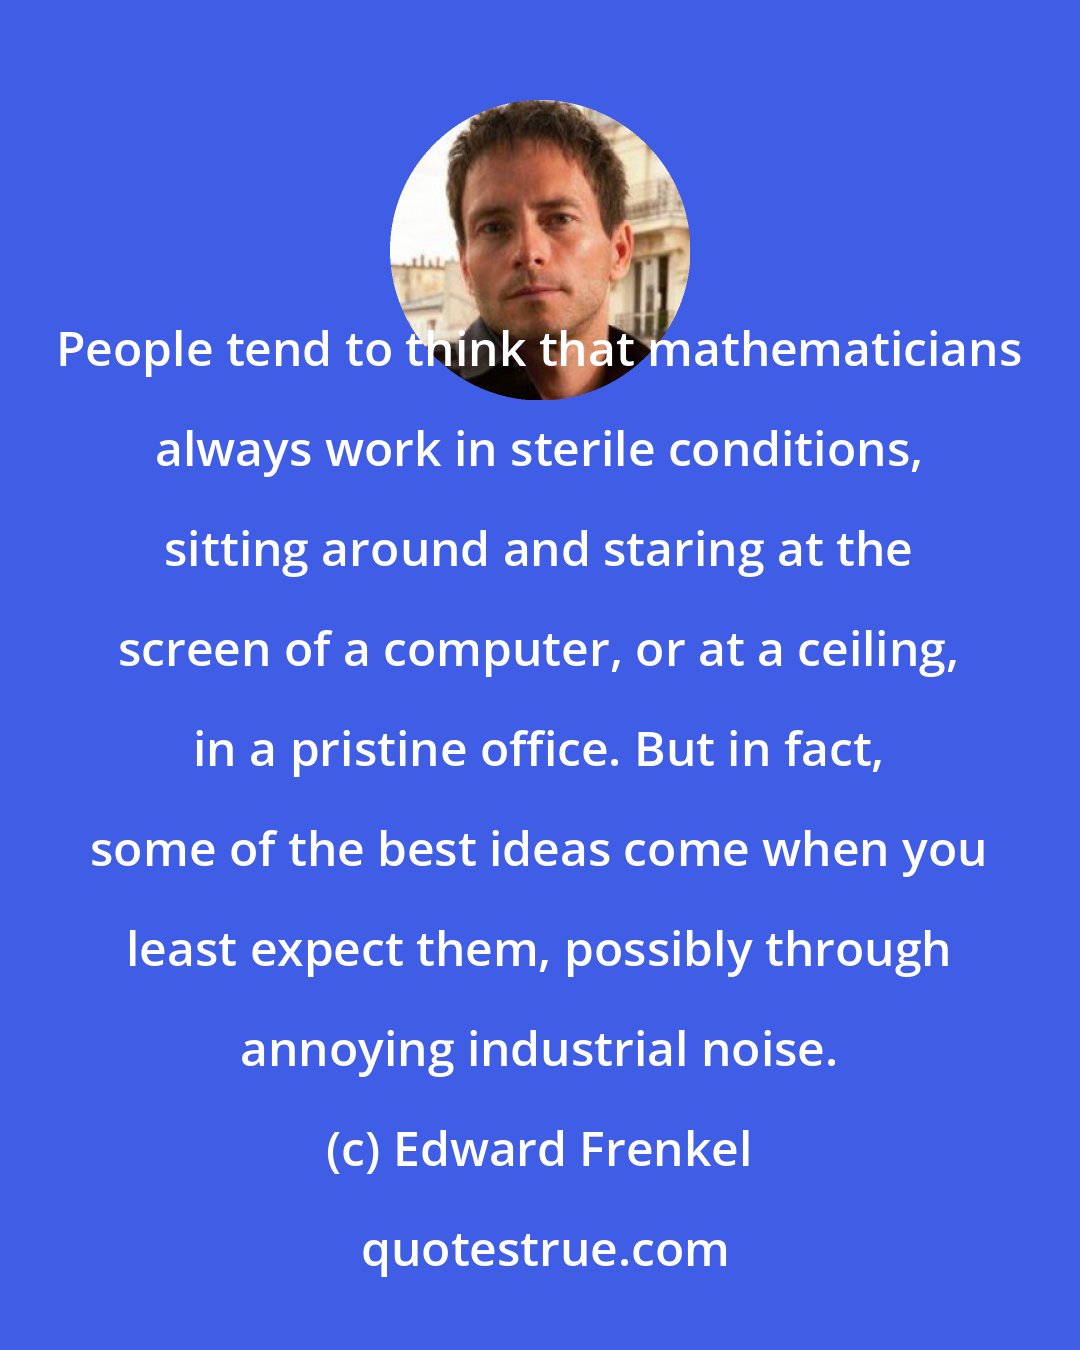 Edward Frenkel: People tend to think that mathematicians always work in sterile conditions, sitting around and staring at the screen of a computer, or at a ceiling, in a pristine office. But in fact, some of the best ideas come when you least expect them, possibly through annoying industrial noise.